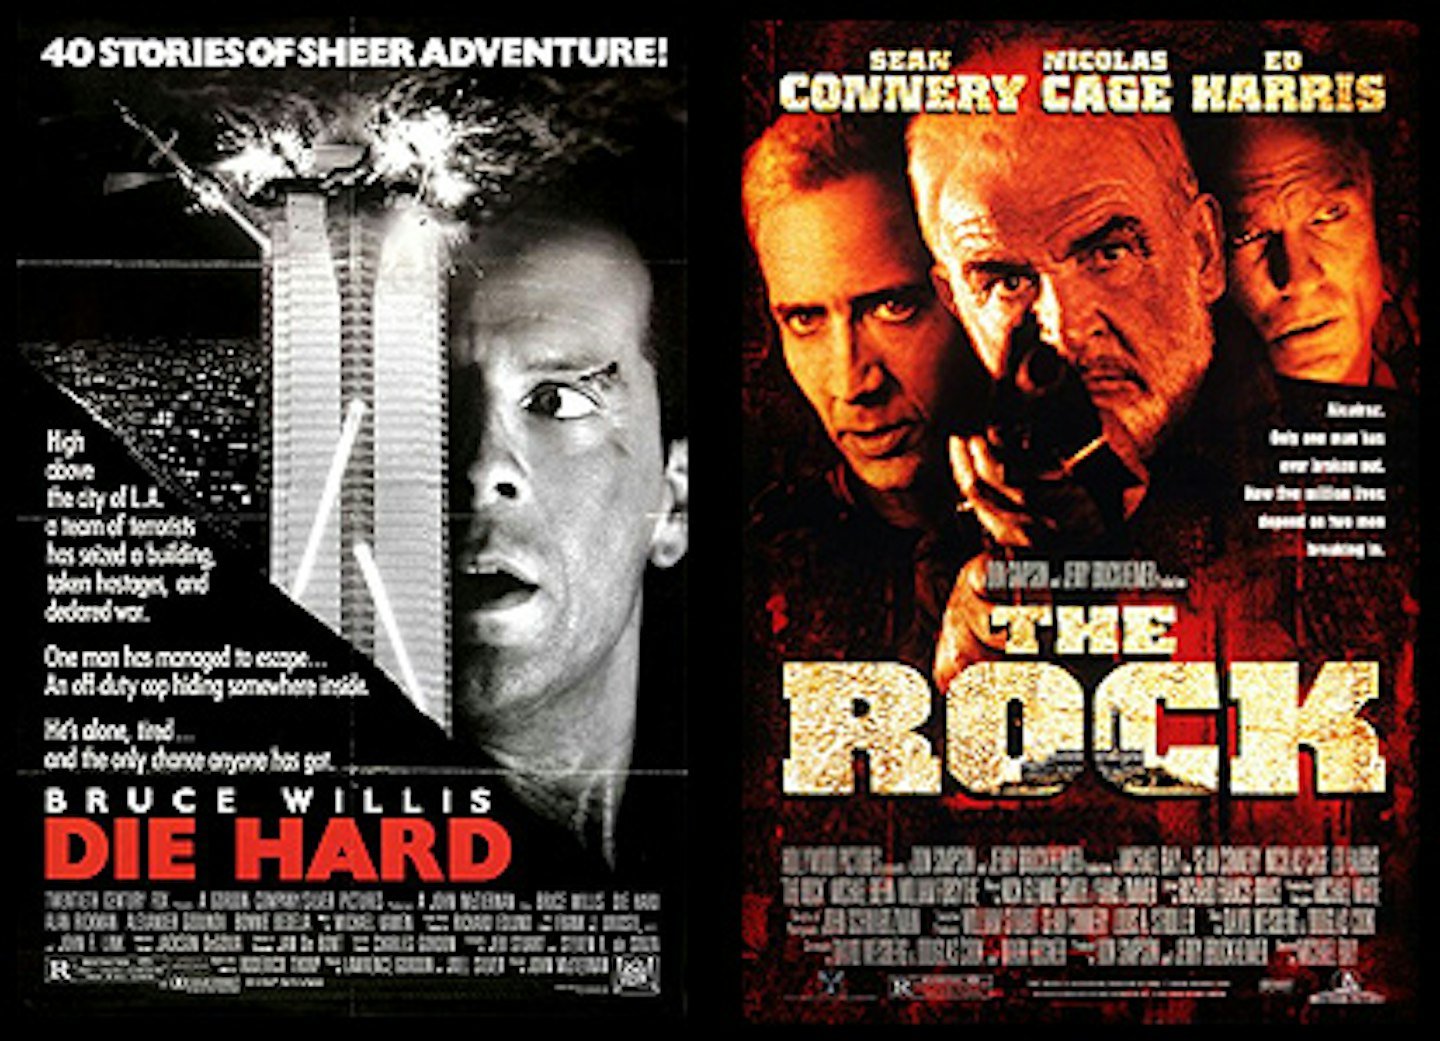 The Rock (1996): Anyone that knows me and my movie tastes, knows that I  have a serious disdain for movies directed by …, ultramookie